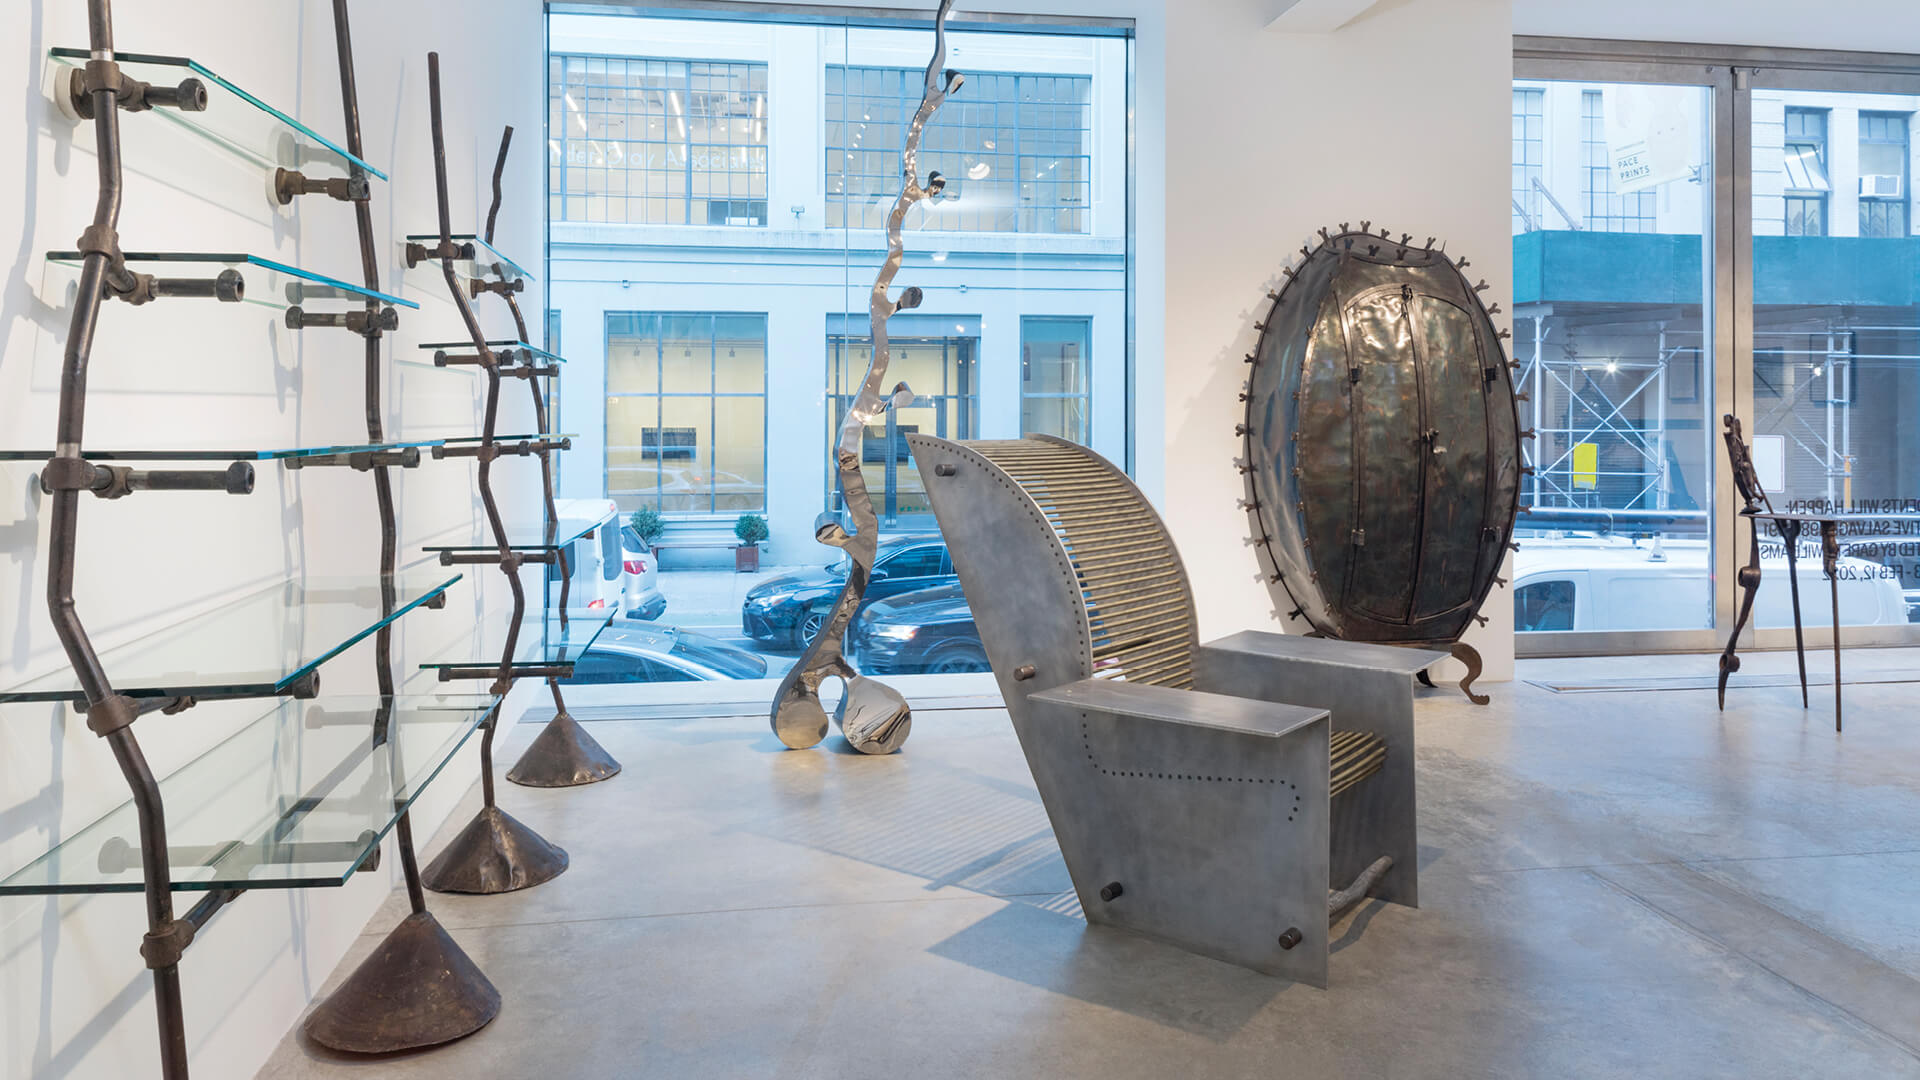 Friedman Benda's latest exhibition presents furniture from Creative Salvage movement